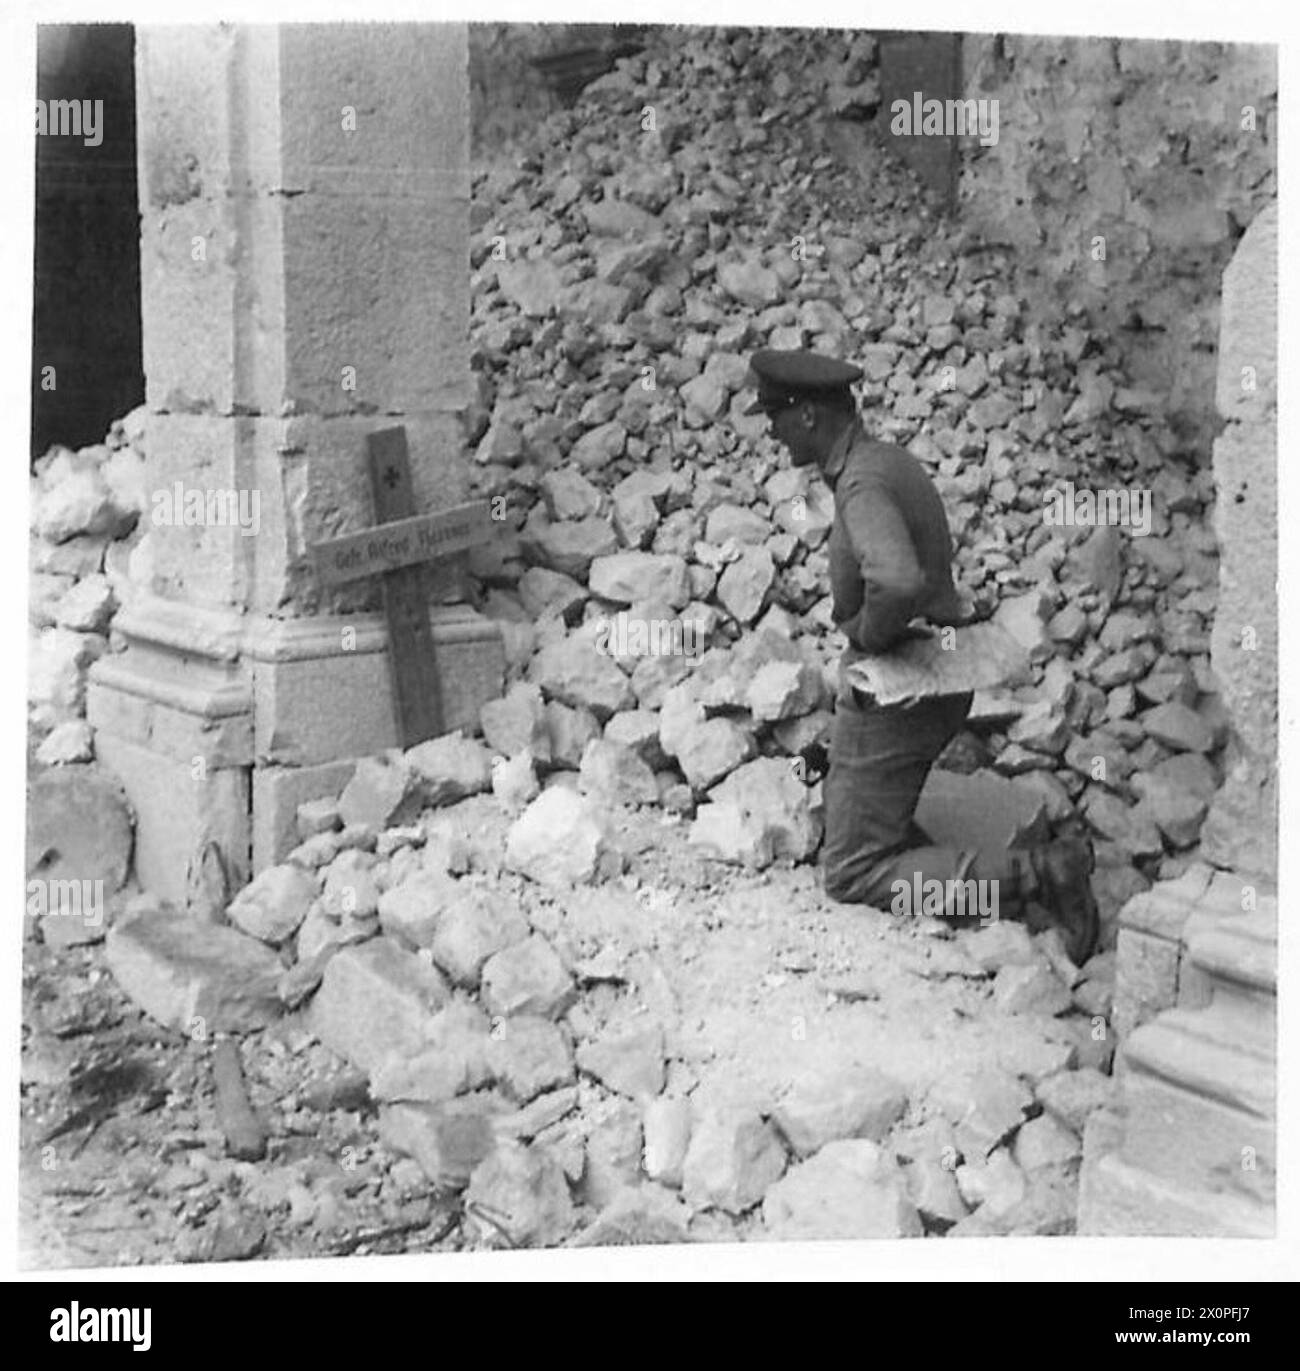 ALLIED ARMIES IN THE ITALIAN CAMPAIGN, 1943-1945 - Captain L. Q. T. Cooper of the 30th Field Regiment, RA, inspecting a grave of a German soldier, Gefreiter Alfred Flessner, in the Monte Cassino Abbey courtyard. Captain Cooper's home address was 44 Chomeley Park, Highgate, London British Army, Royal Artillery, Polish Army, Polish Armed Forces in the West, Polish Corps, II, 8th Army Stock Photo